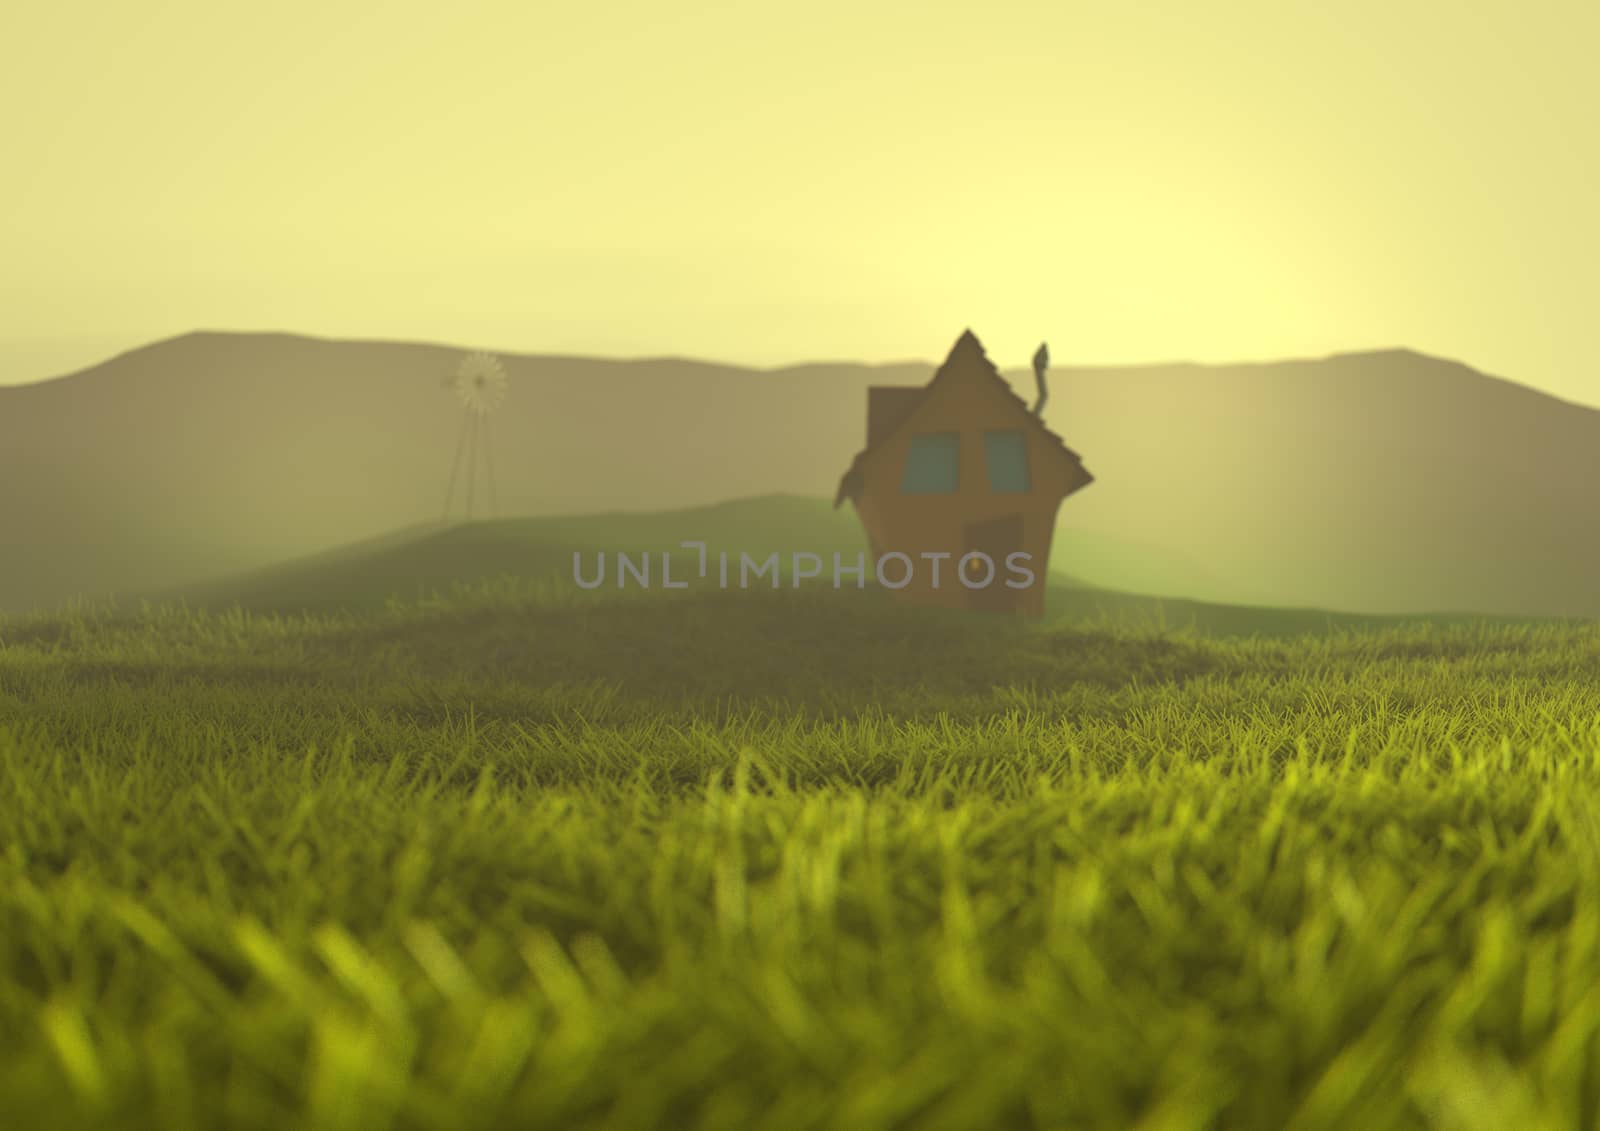 stylised farmhouse on green misty grassland rendered in 3D